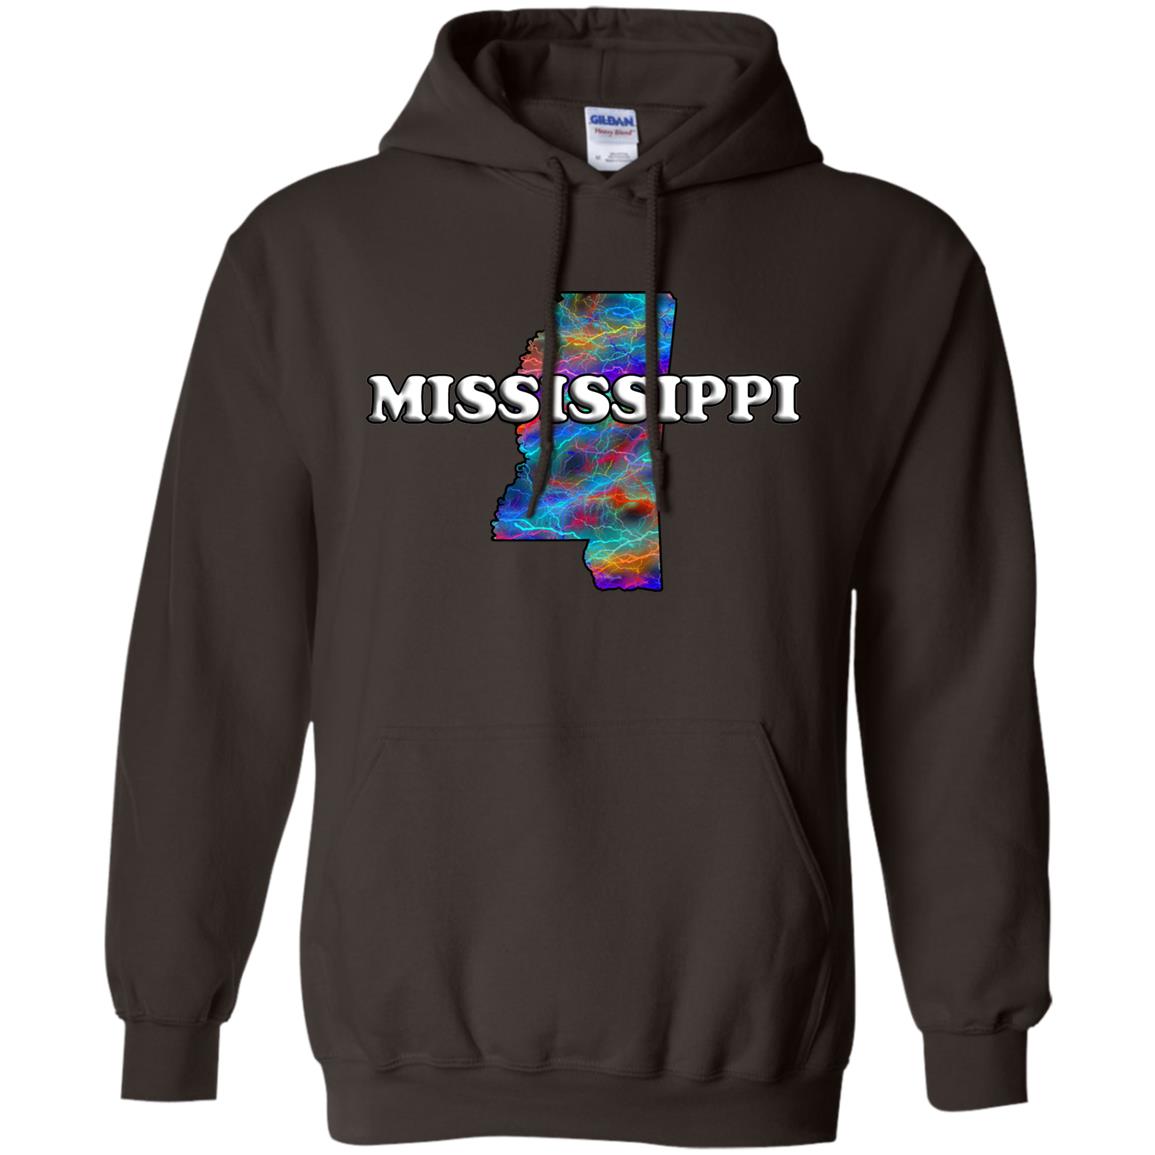 MISSISSIPPI STATE HOODIE